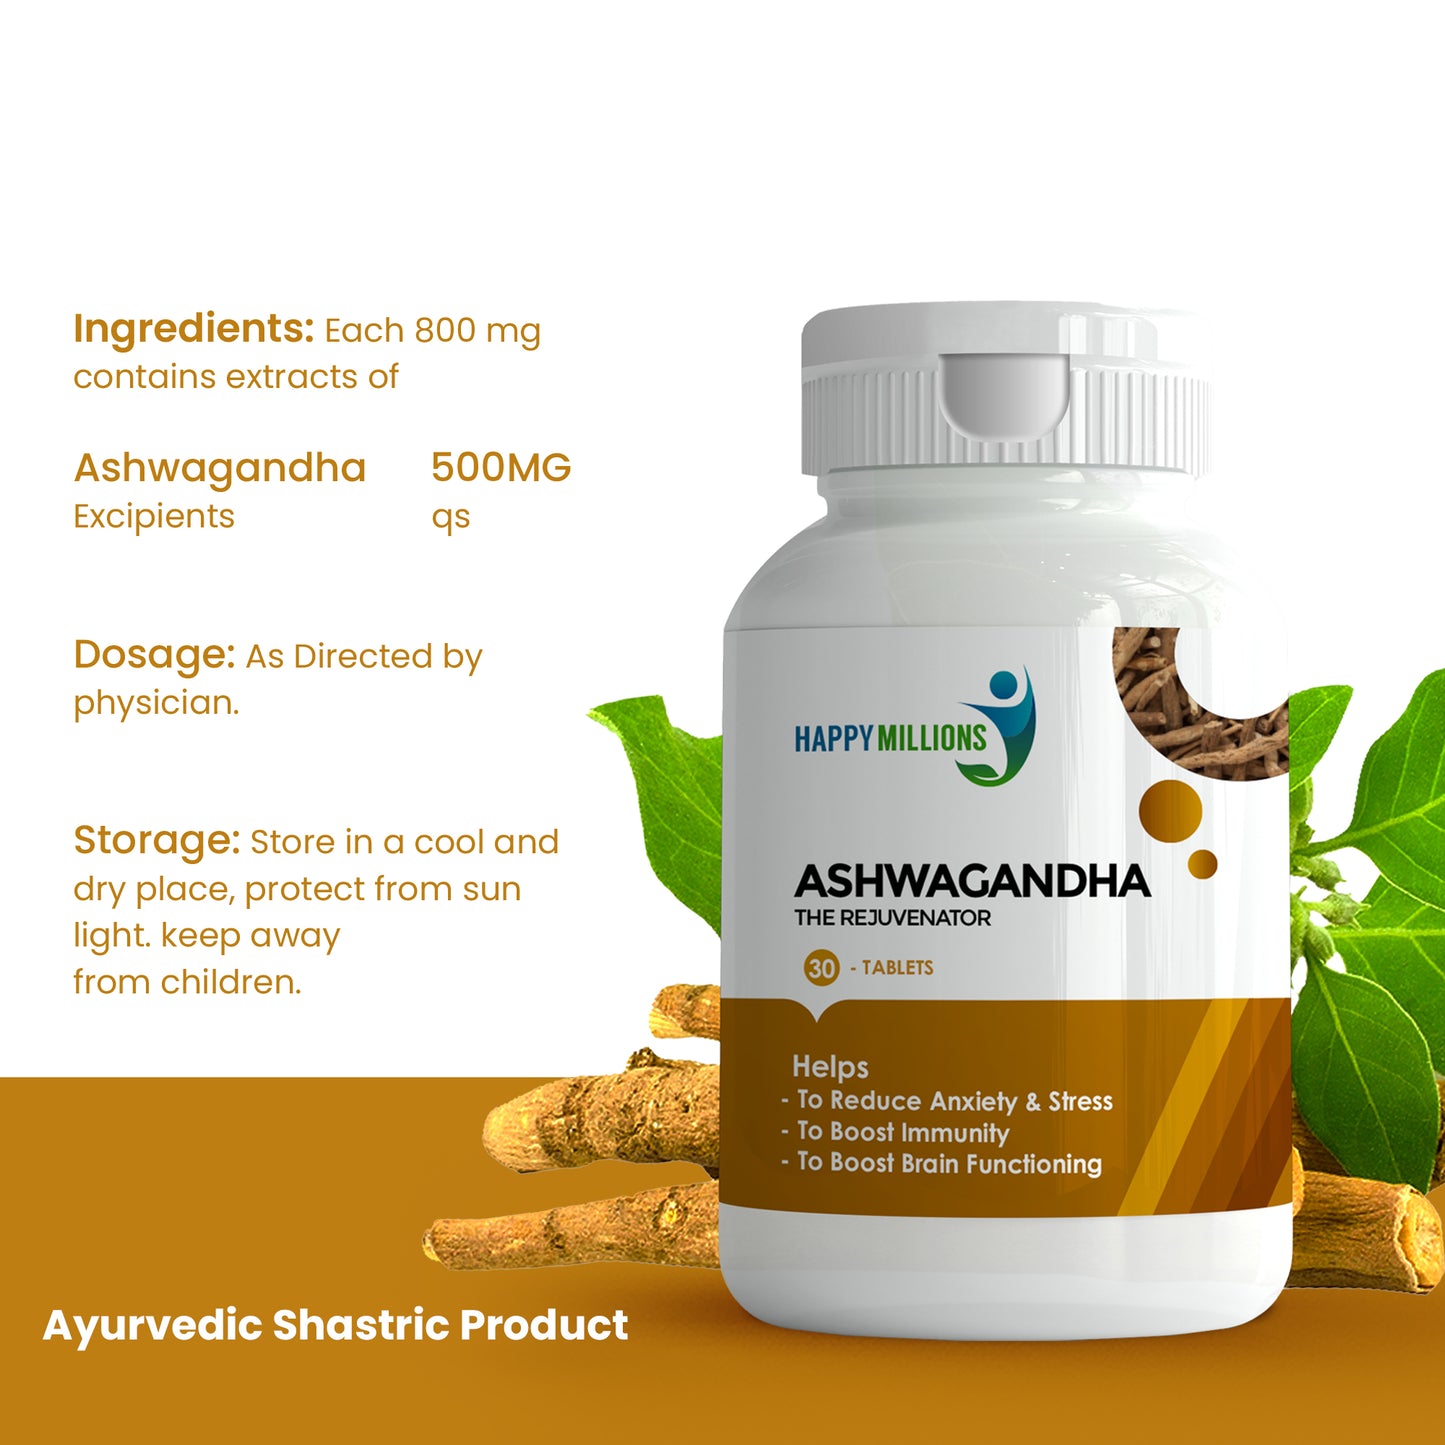 Explore the Power of Nature with Happy Millions Ashwagandha Key Ingredients for Stress Relief, Energy Boost, and Immune Support - Your Holistic Health Solution.